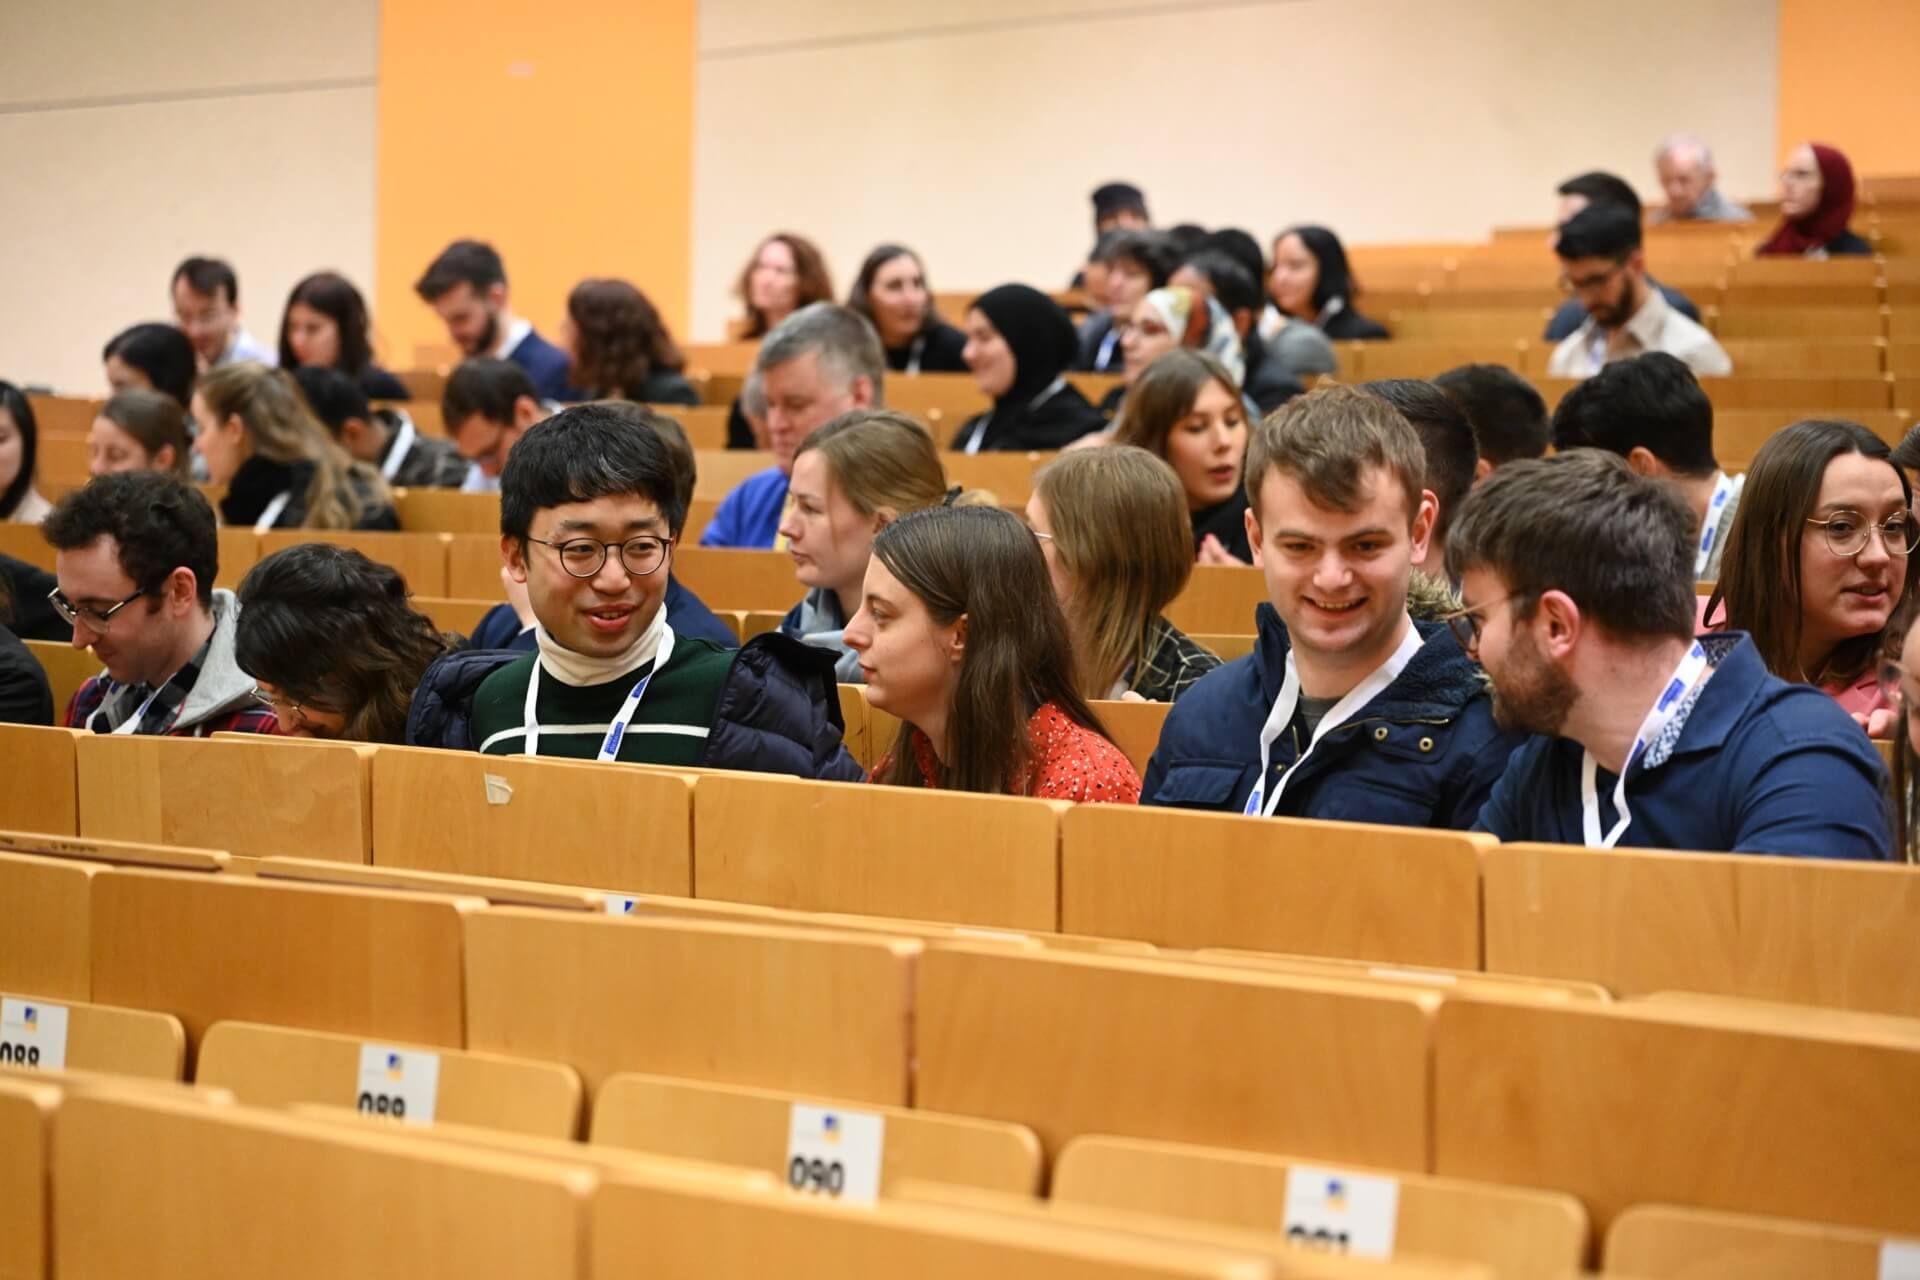 Attendees attending a session at the Bonn Symposium